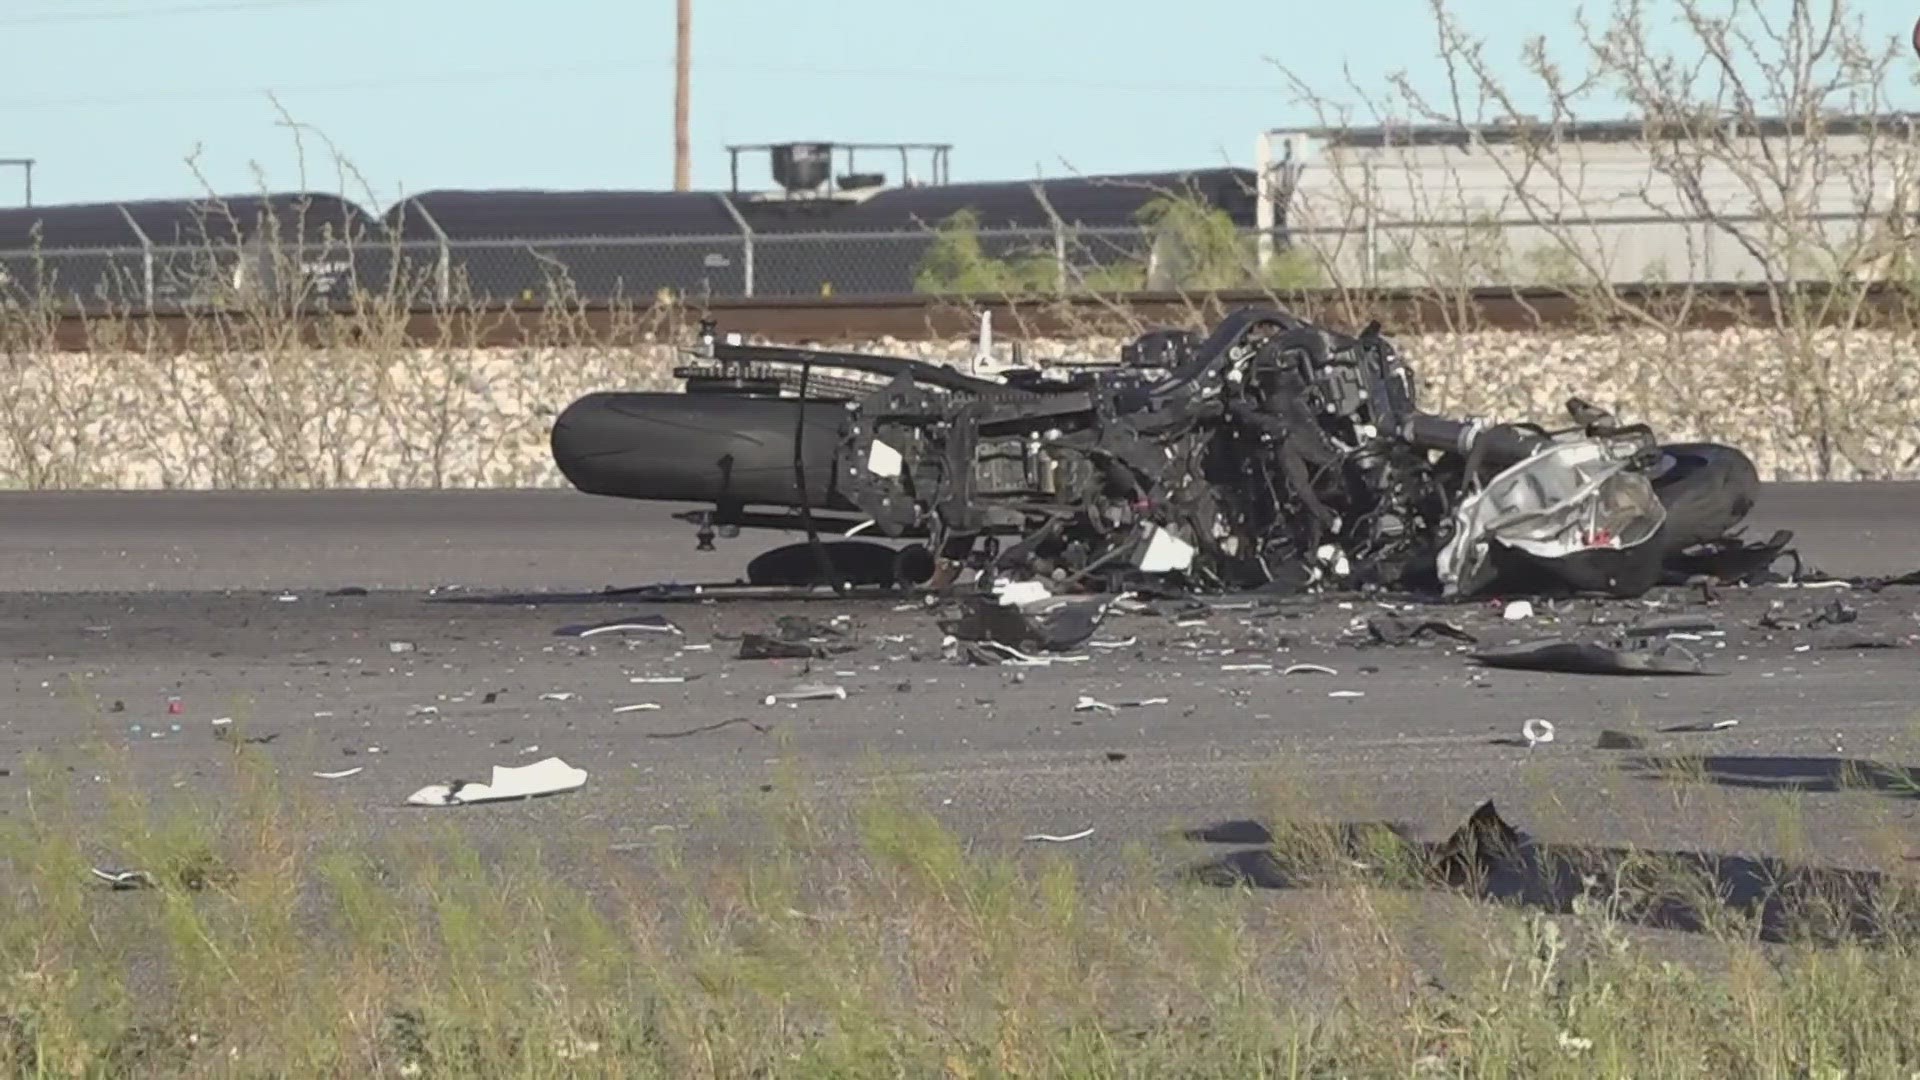 According to Texas DPS, two motorcycles and a Chevrolet Traverse were involved in the crash that left one dead on Thursday.